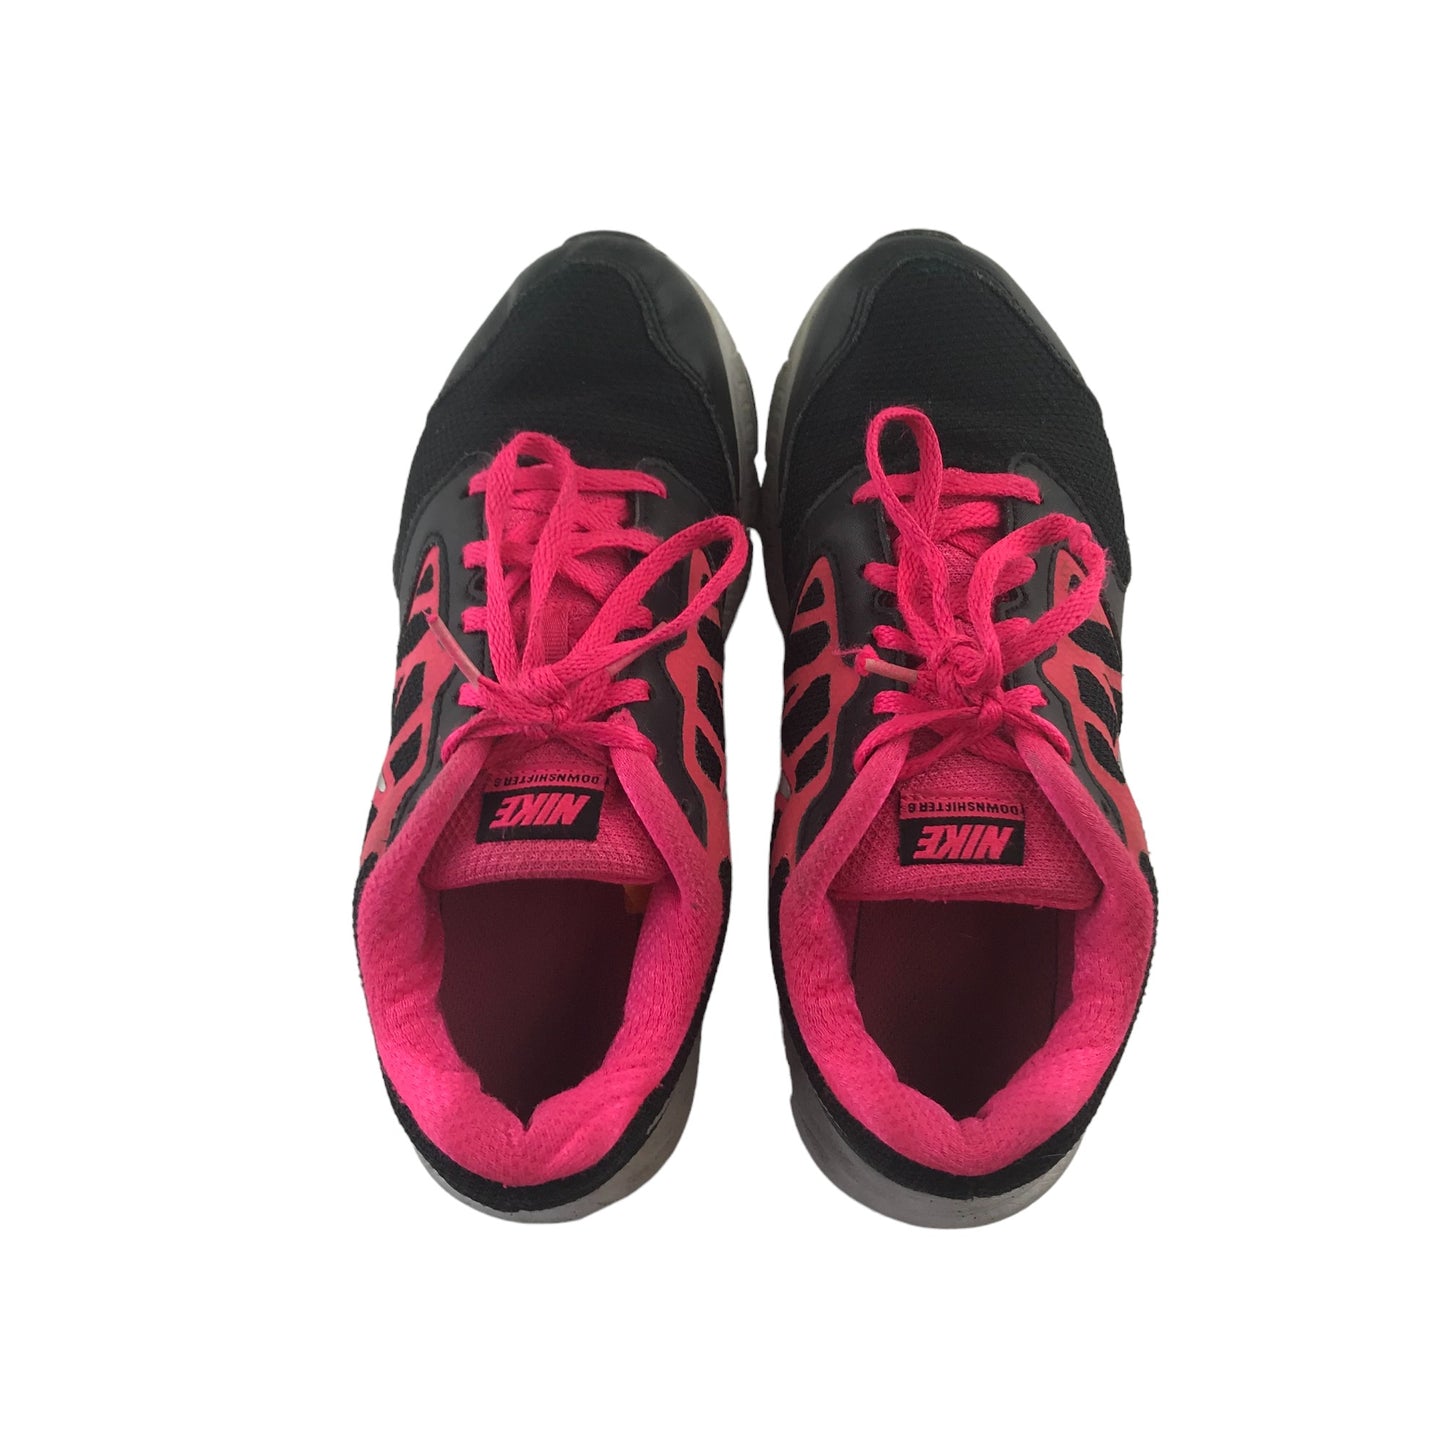 Nike Downshifter 6 Trainers Shoe Size 4 Black and Neon Pink Details